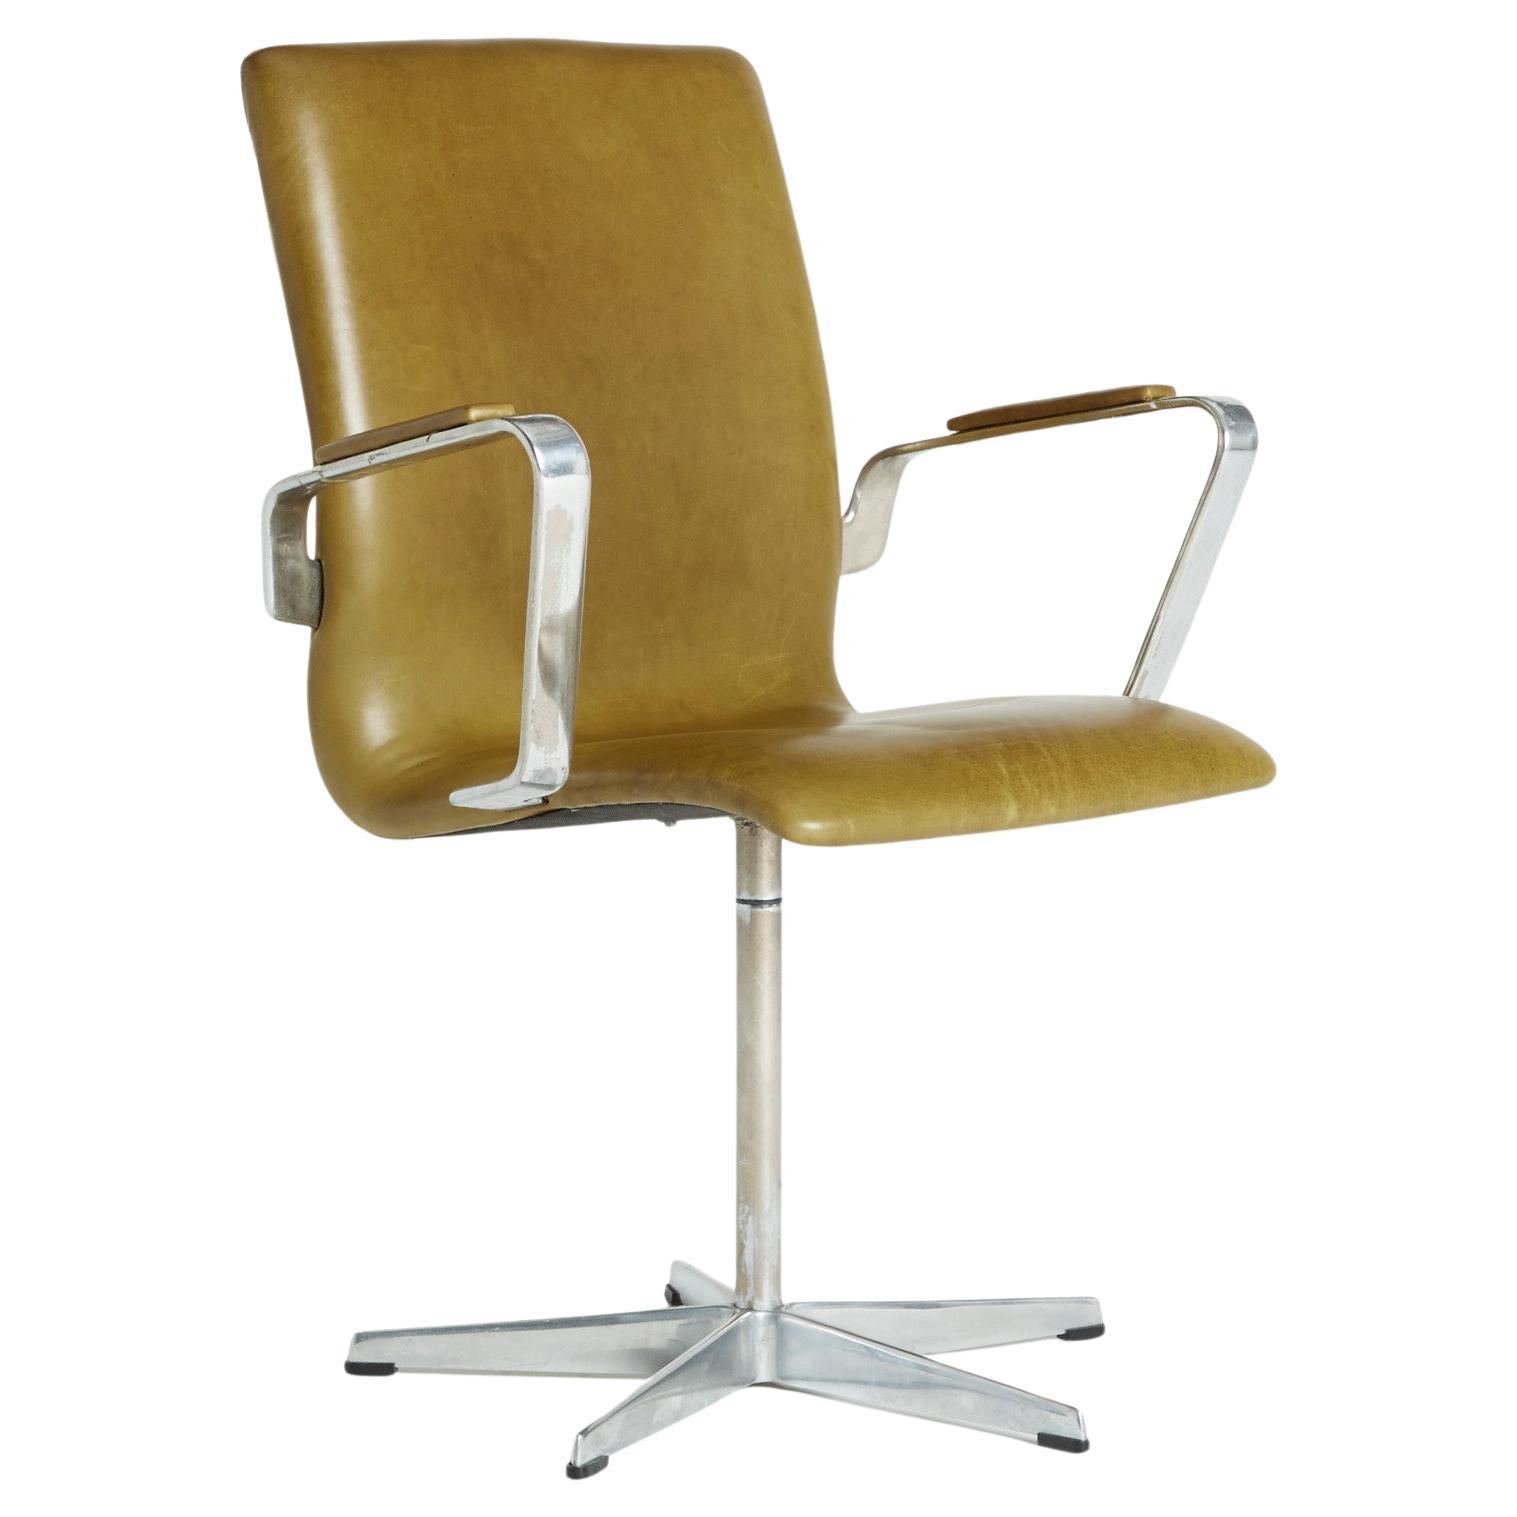 Leather 'Oxford' Swivel Chair by Arne Jacobsen for Fritz Hansen, 1973, Signed